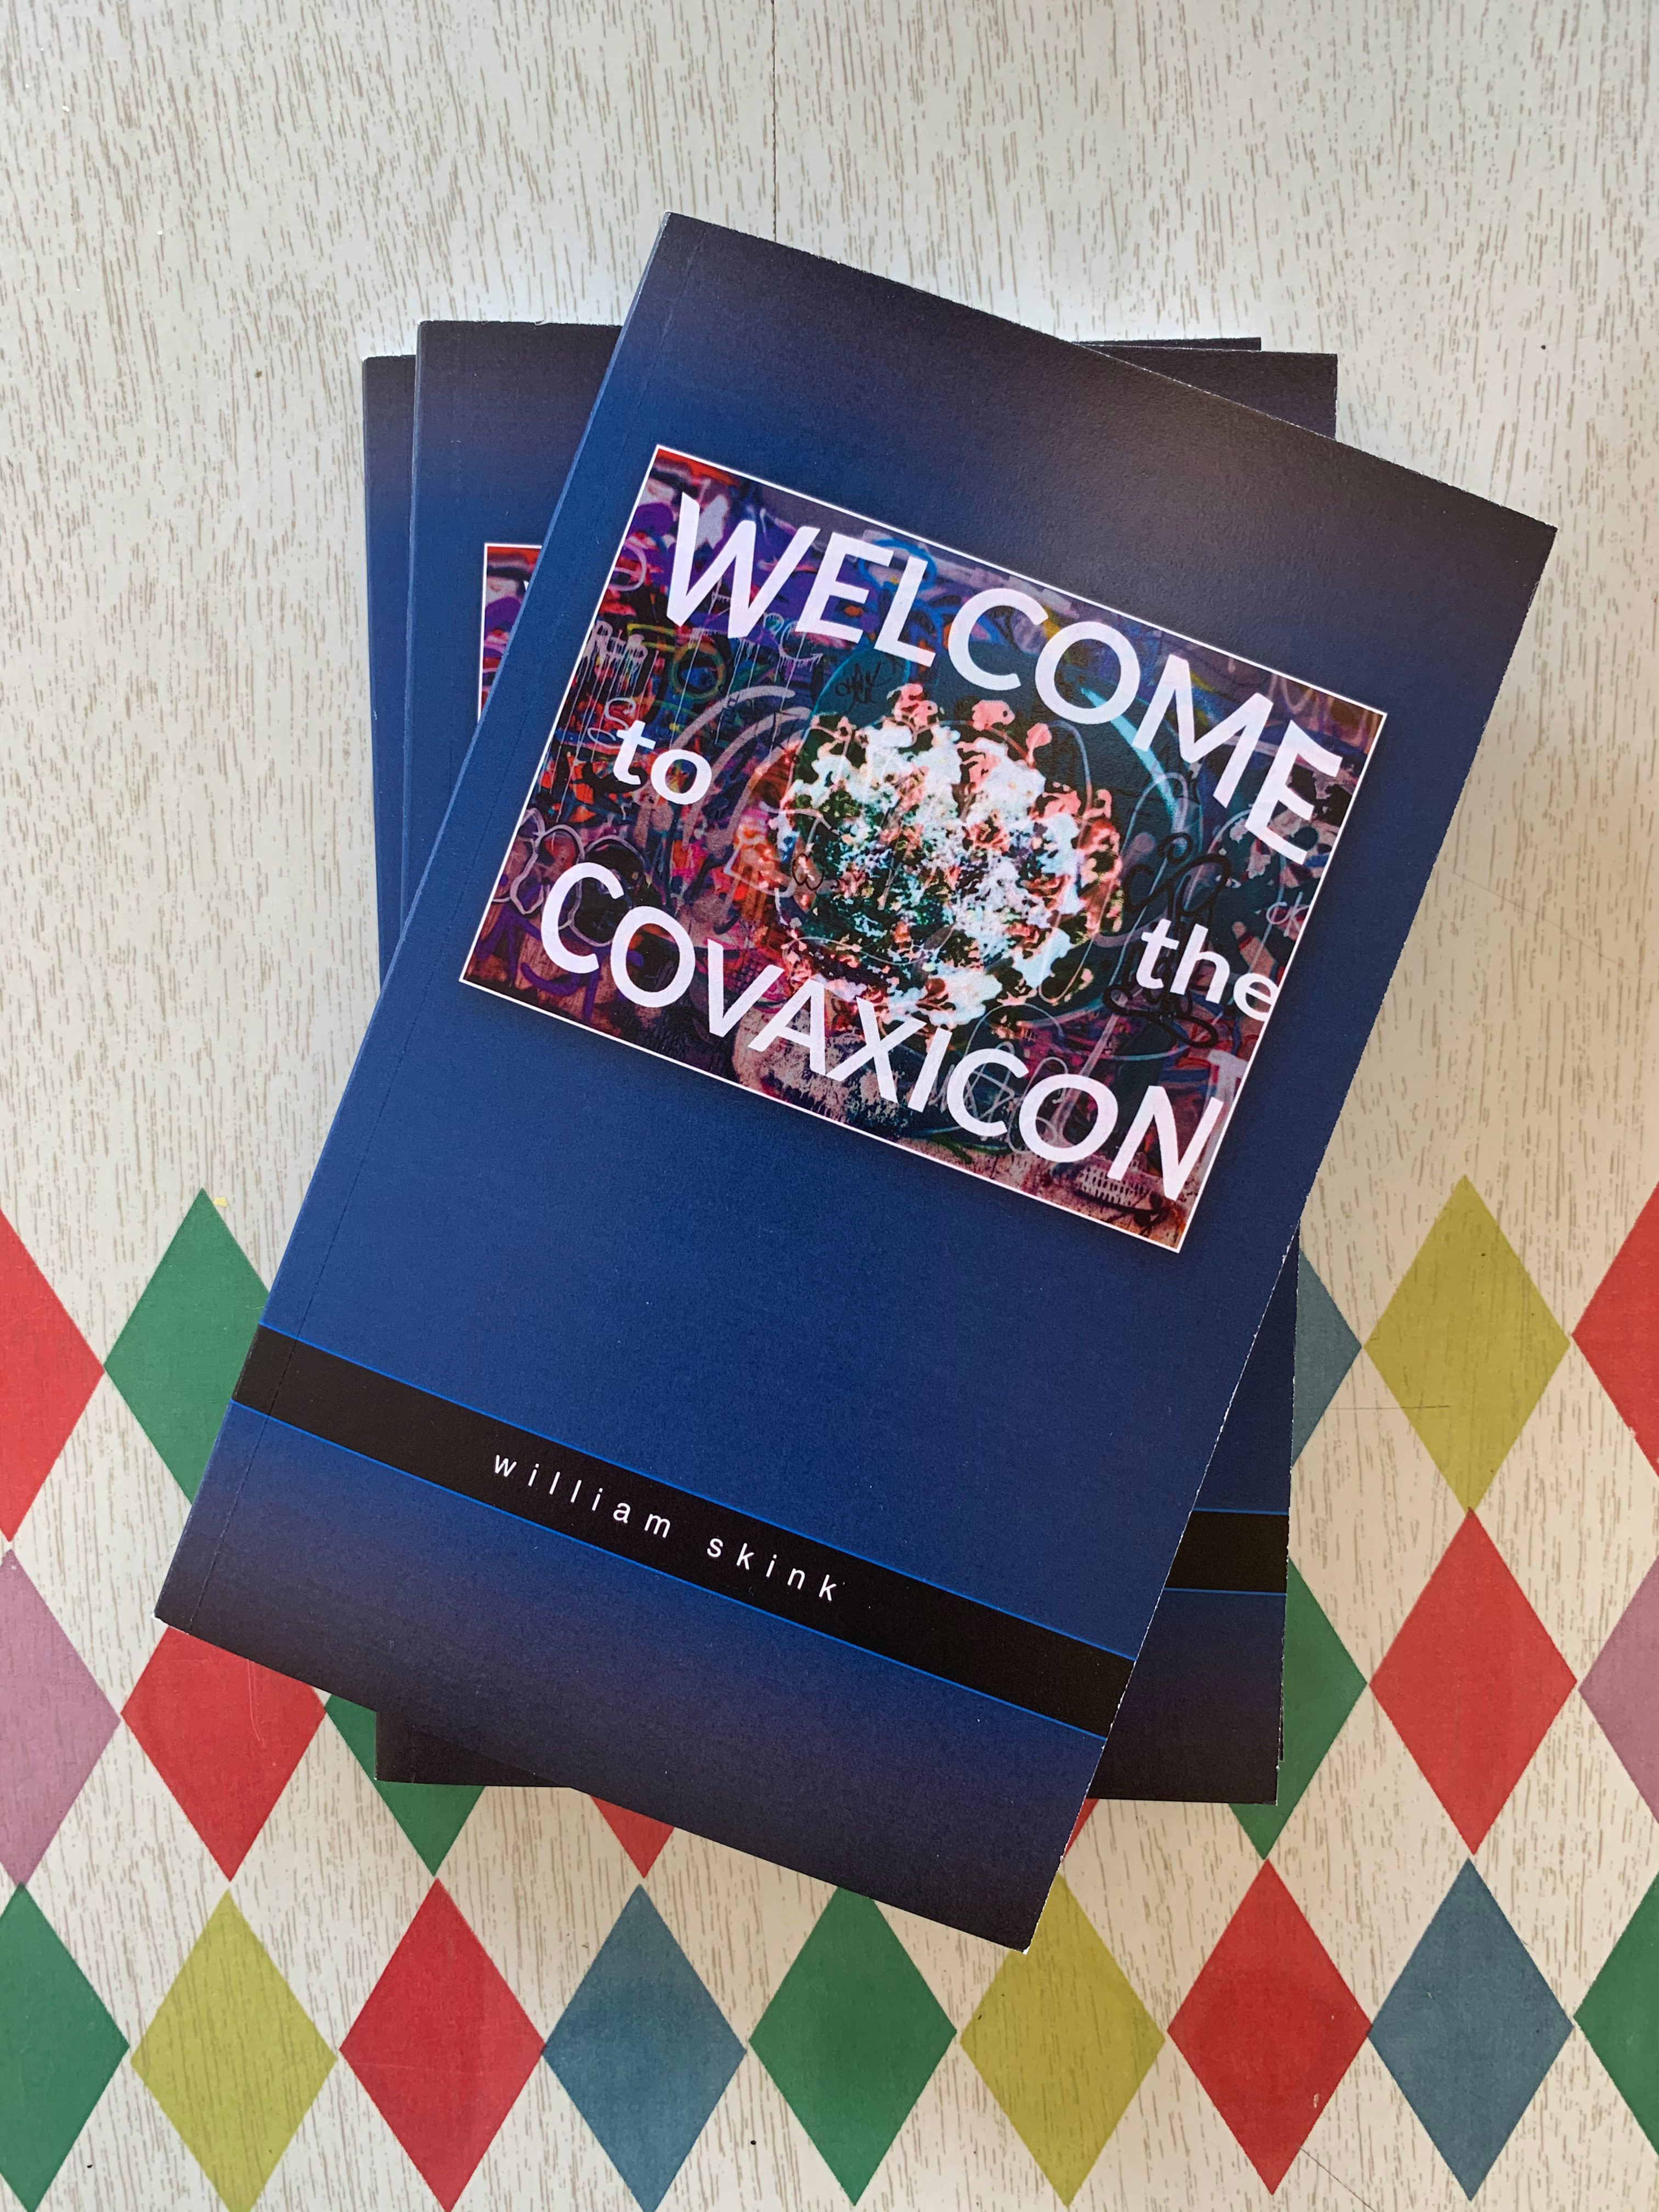 Welcom to the Covaxicon